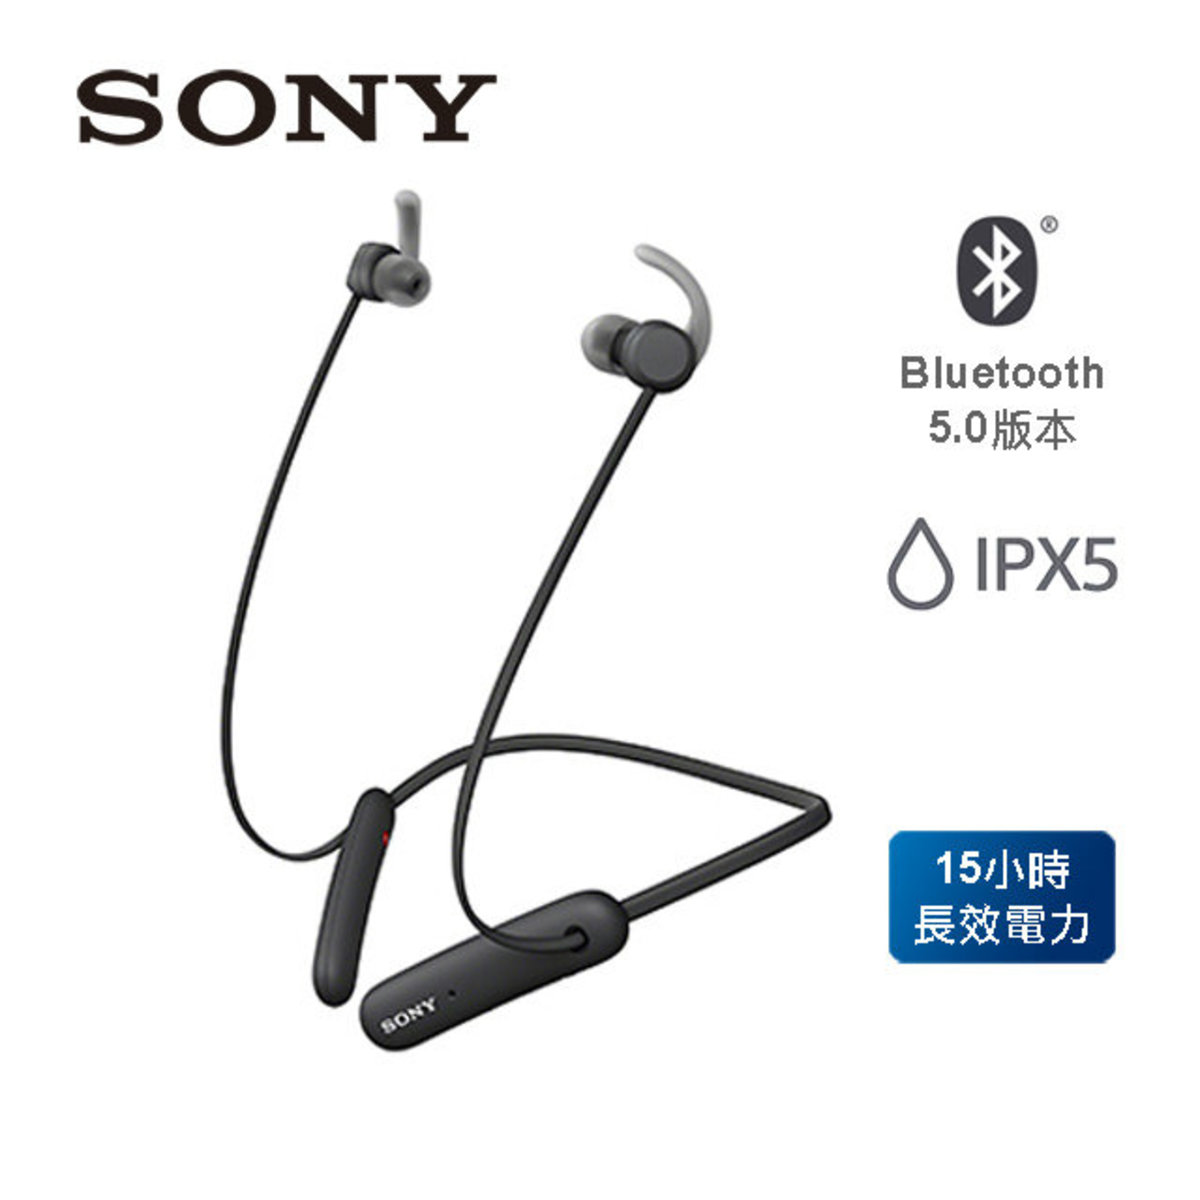 Sony | AUTHORIZED GOODS WI-SP510 Black | HKTVmall Online Shopping